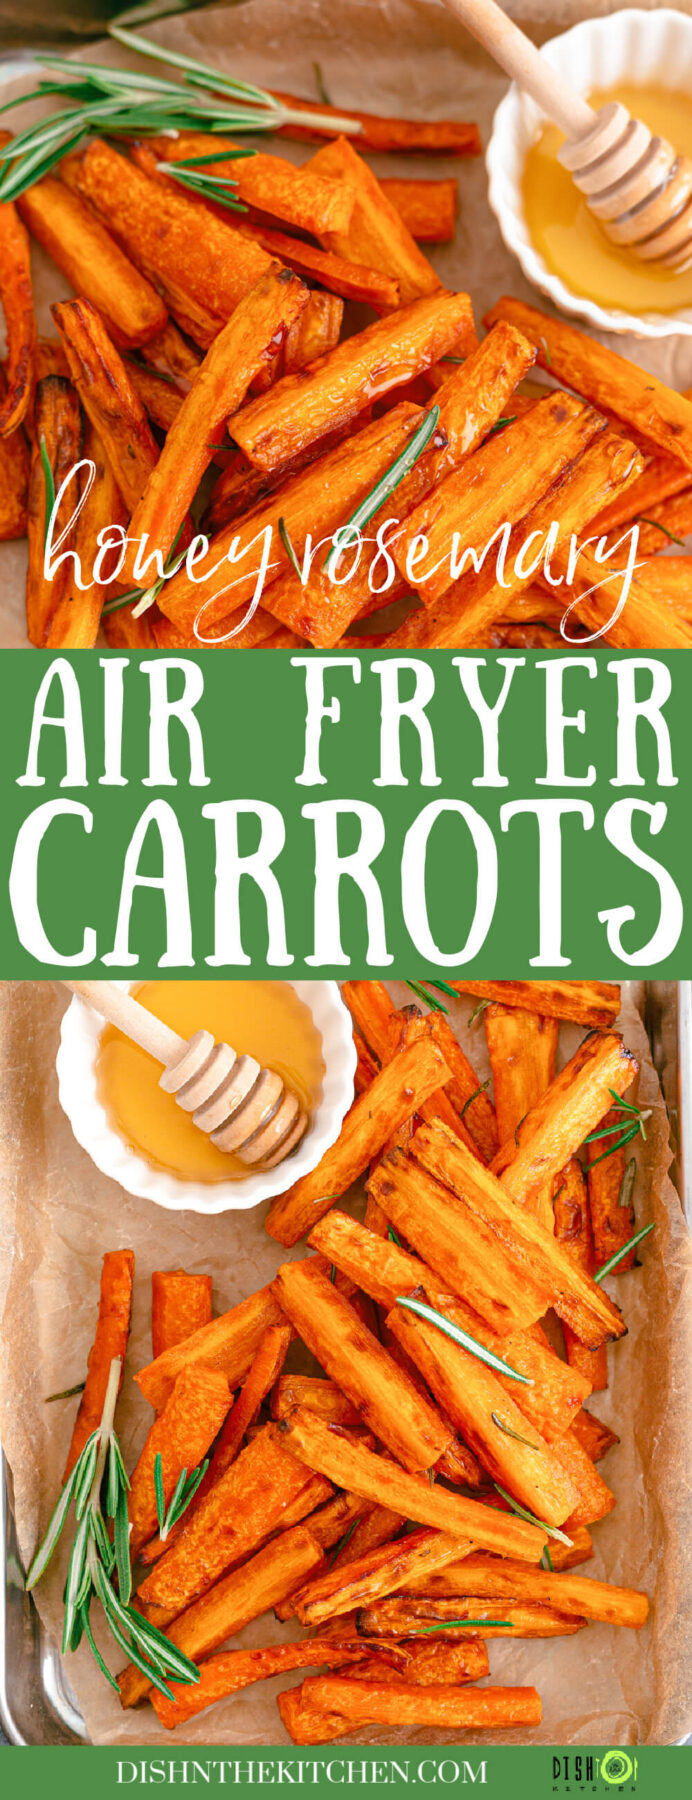 Pinterest image of perfectly roasted air fryer carrots on a parchment lined tray with rosemary and a small dish of honey.